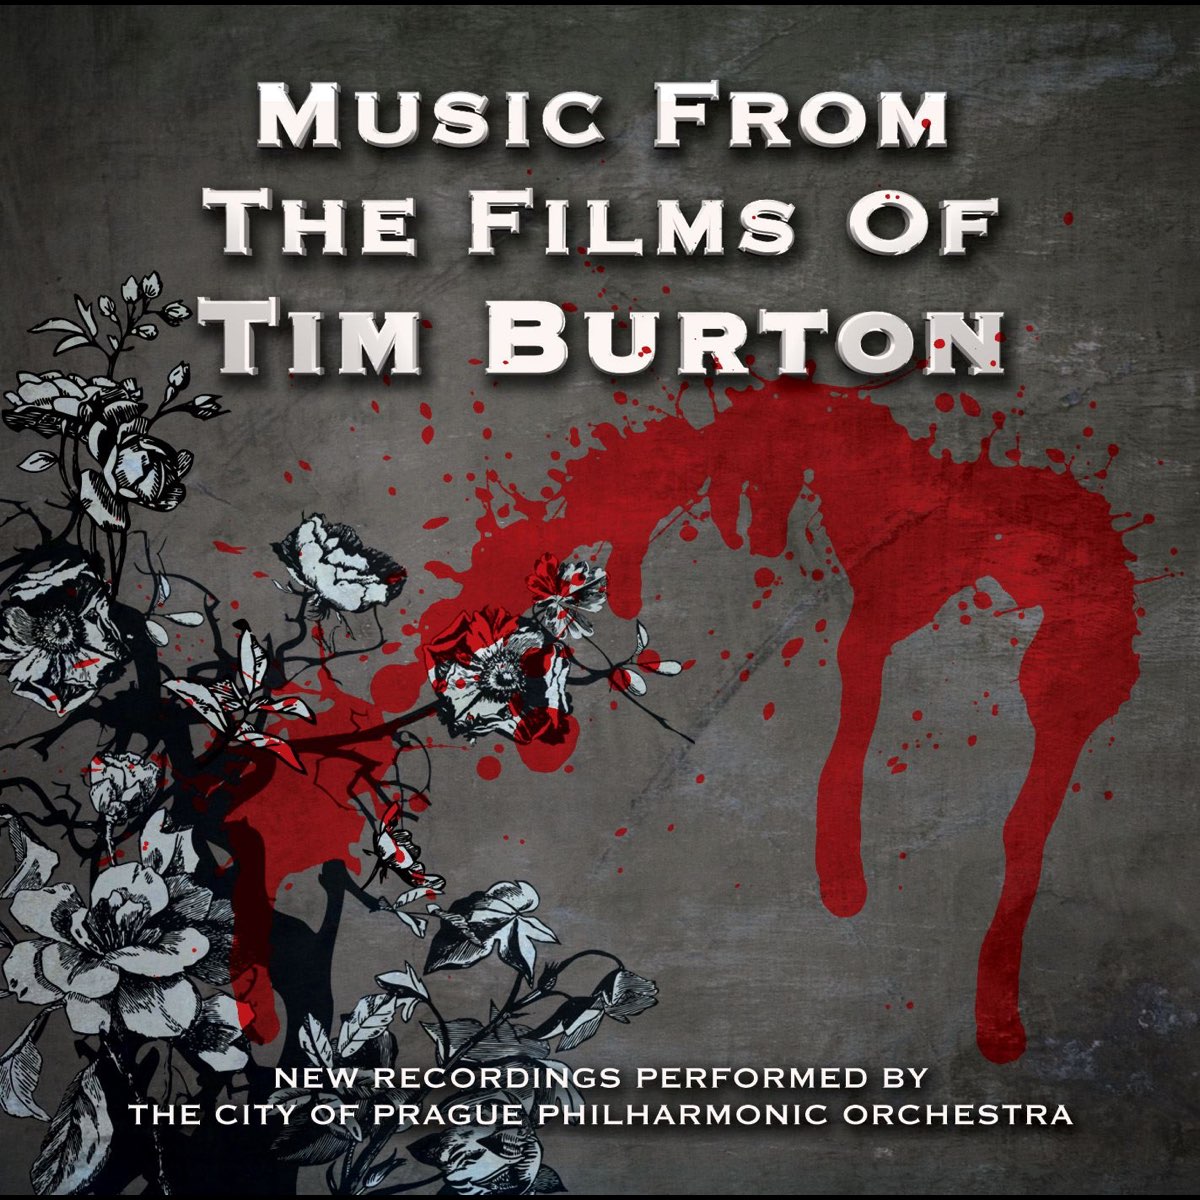 Music from the Films of Tim Burton (Tribute Album) by The City of Prague  Philharmonic Orchestra on Apple Music